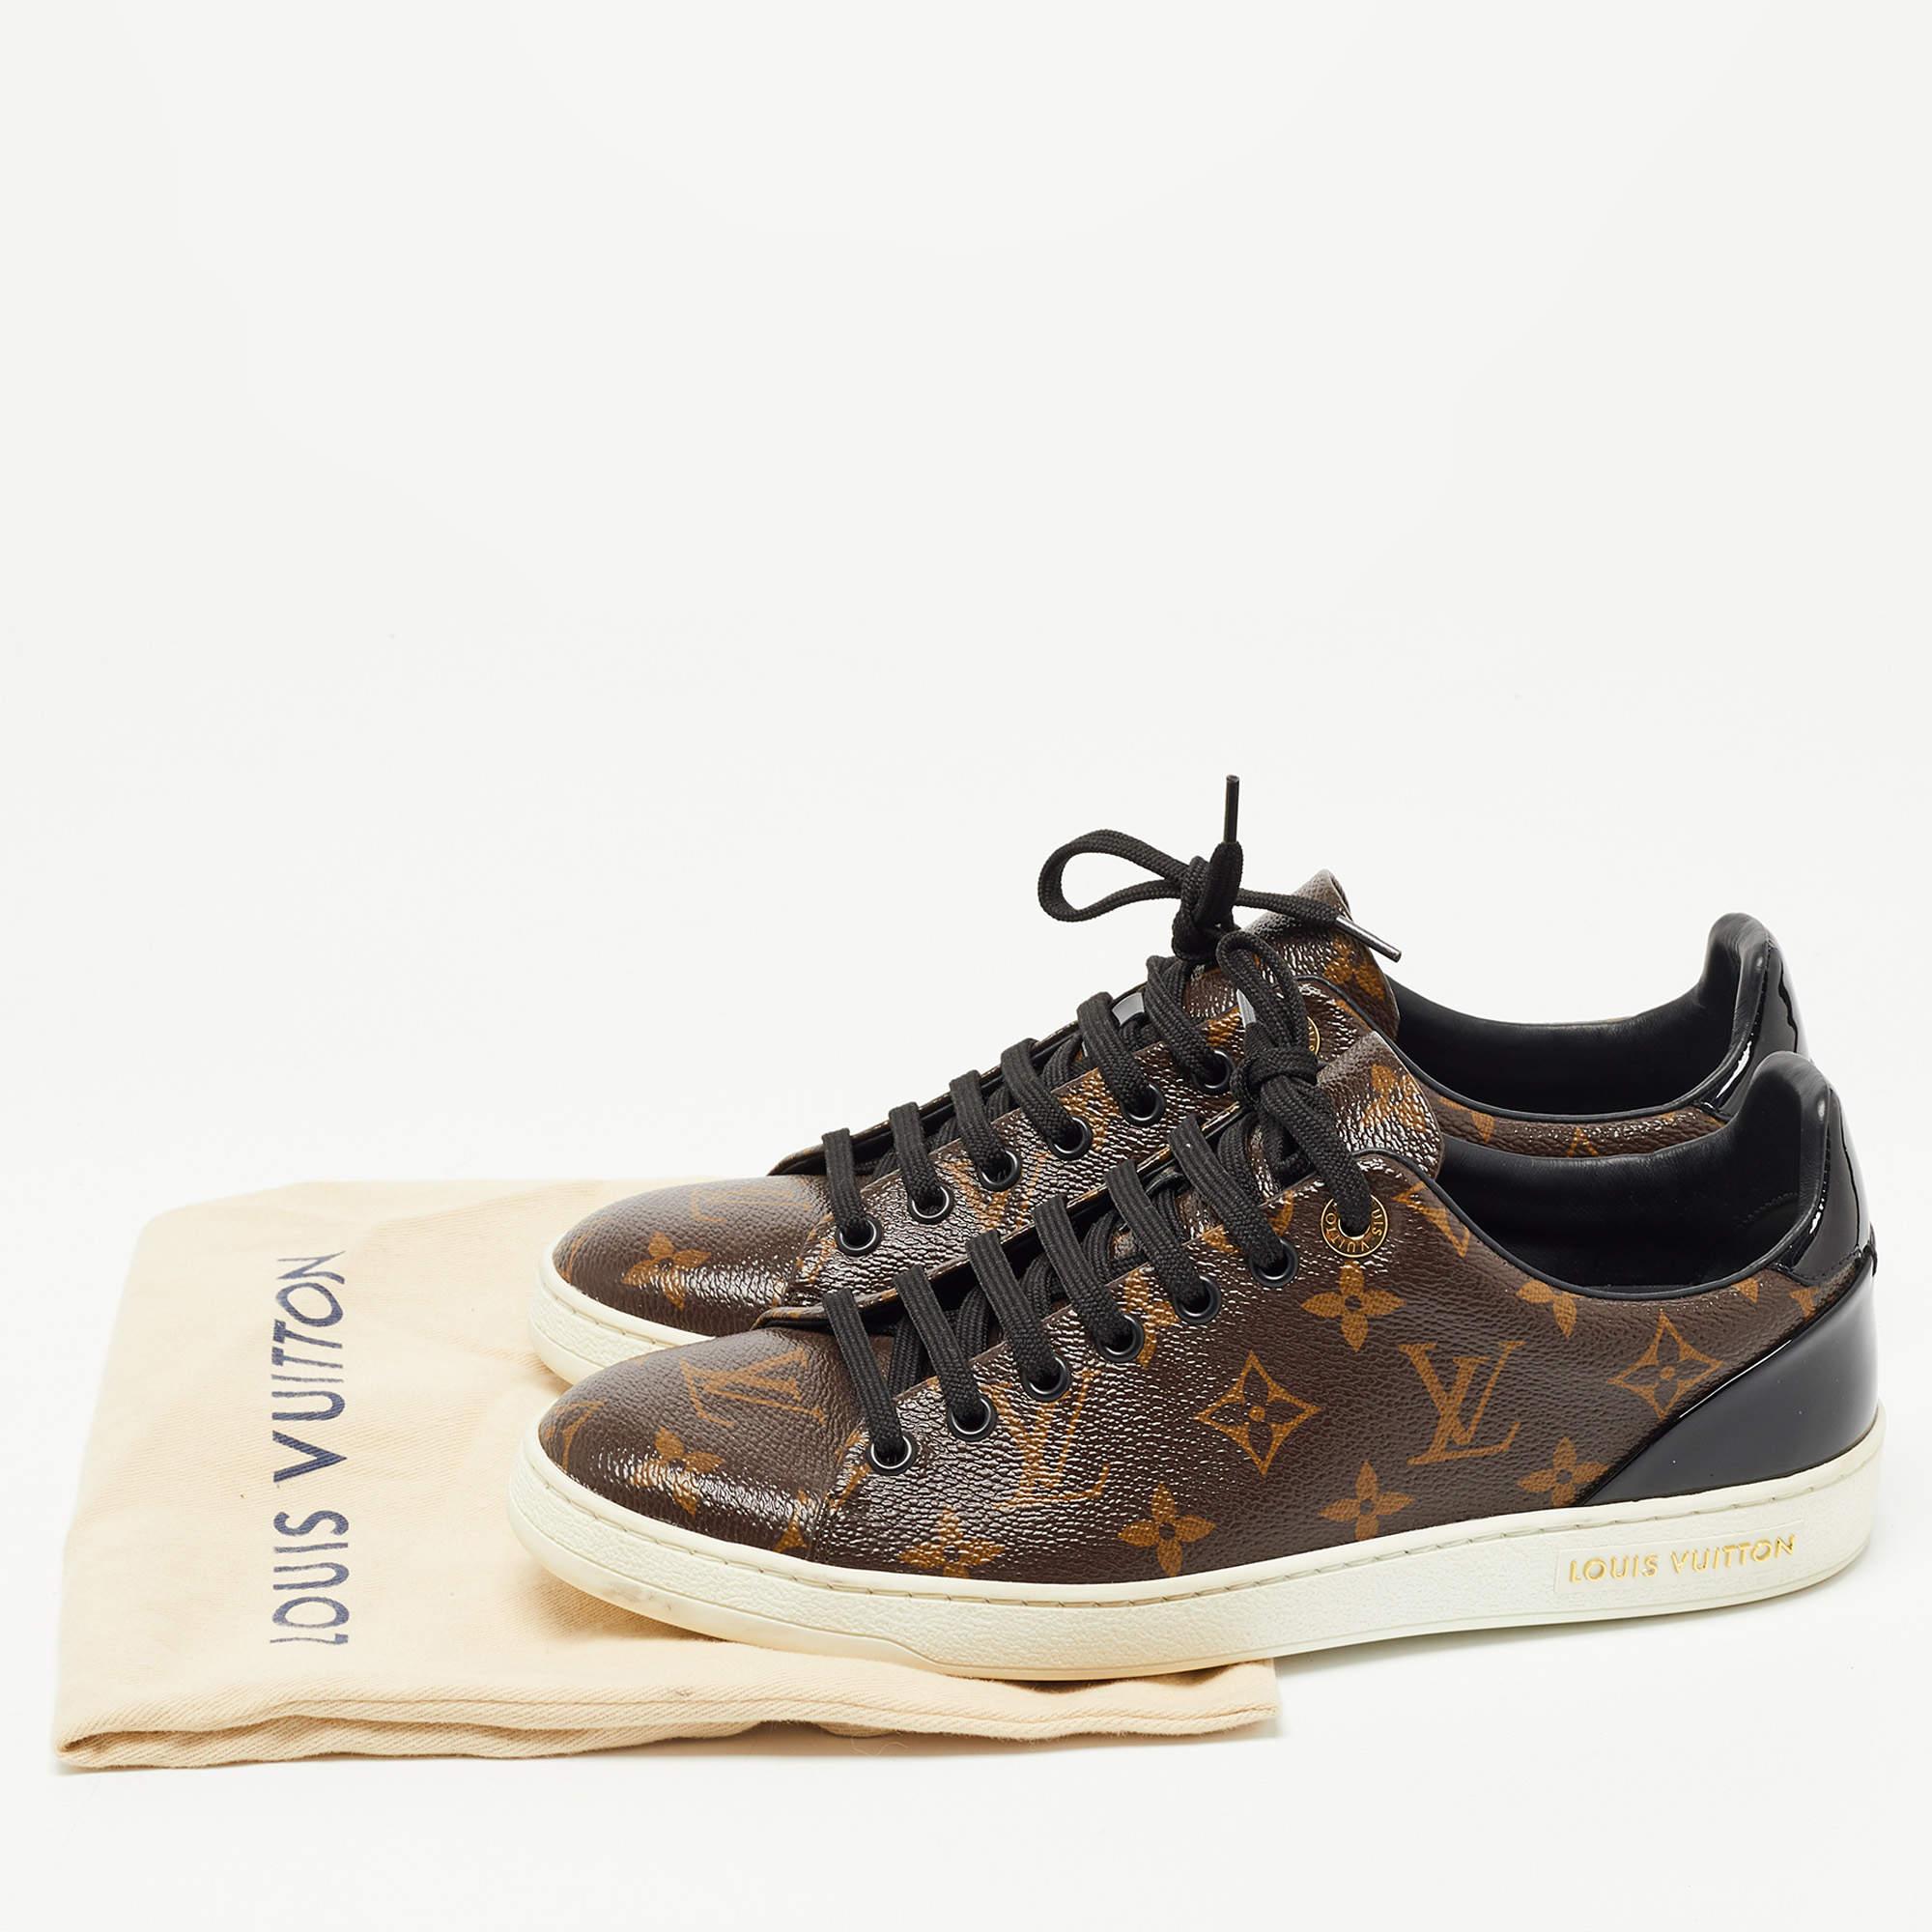 Louis Vuitton Monogram Canvas and Patent Leather Frontrow Sneakers Size 38.5 5